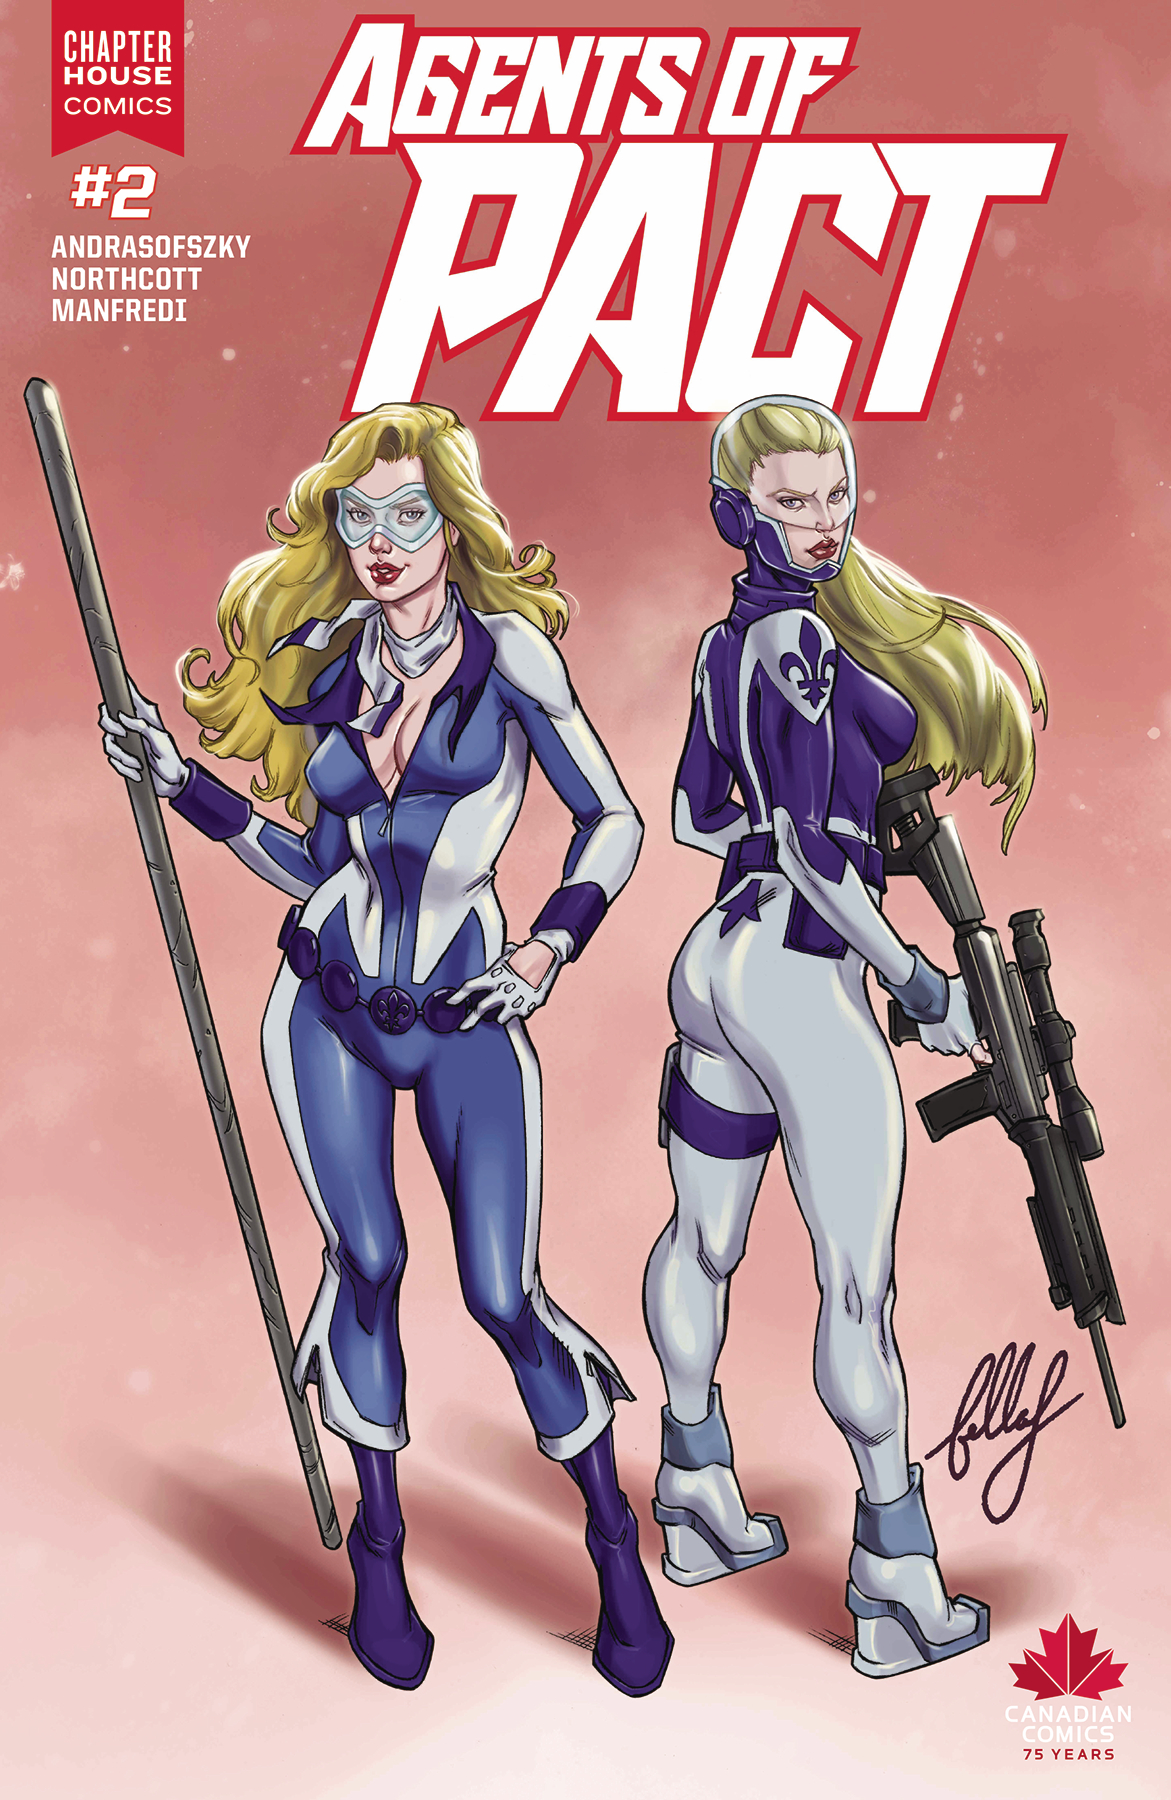 AGENTS OF PACT #2